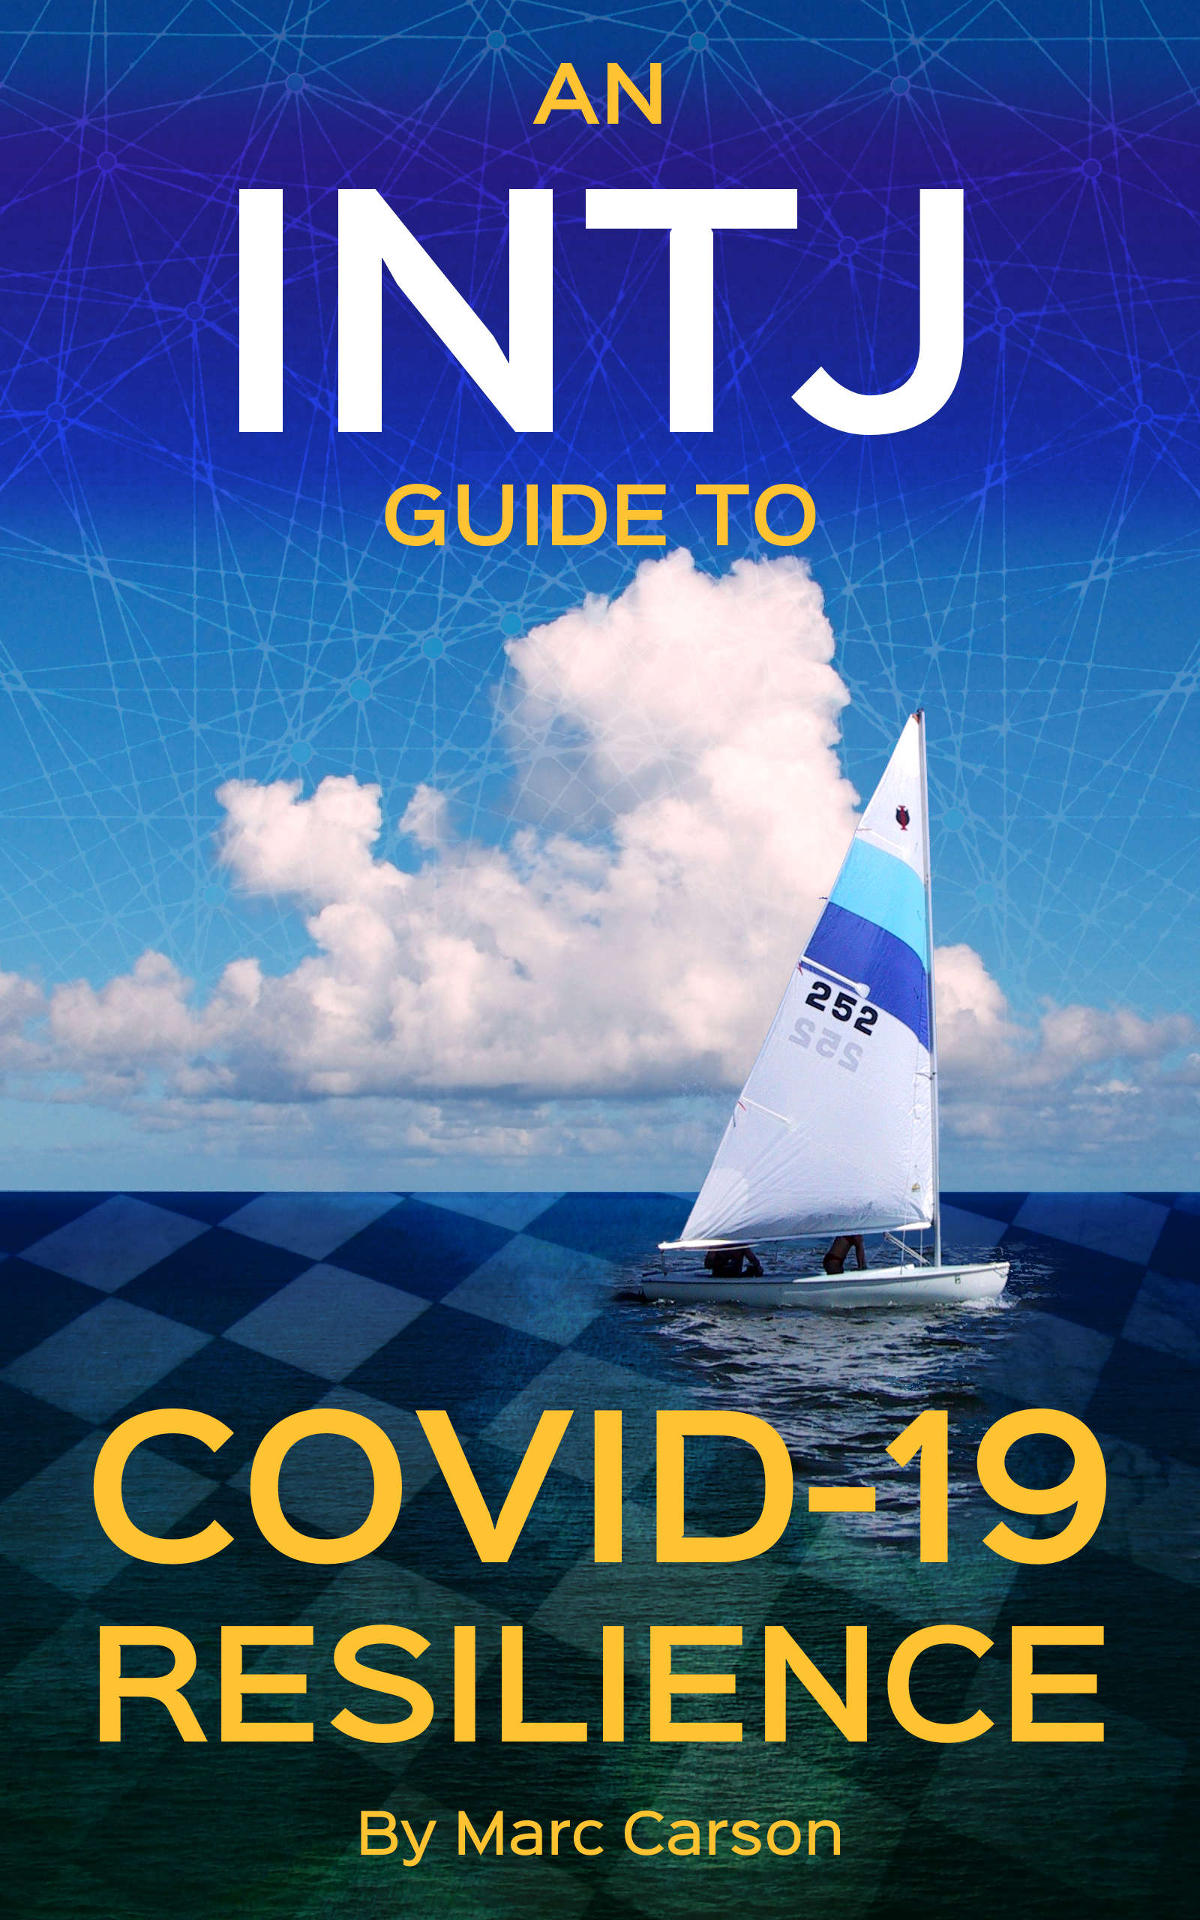 COVID-19 Guide cover showing a sailboat crossing dark waters